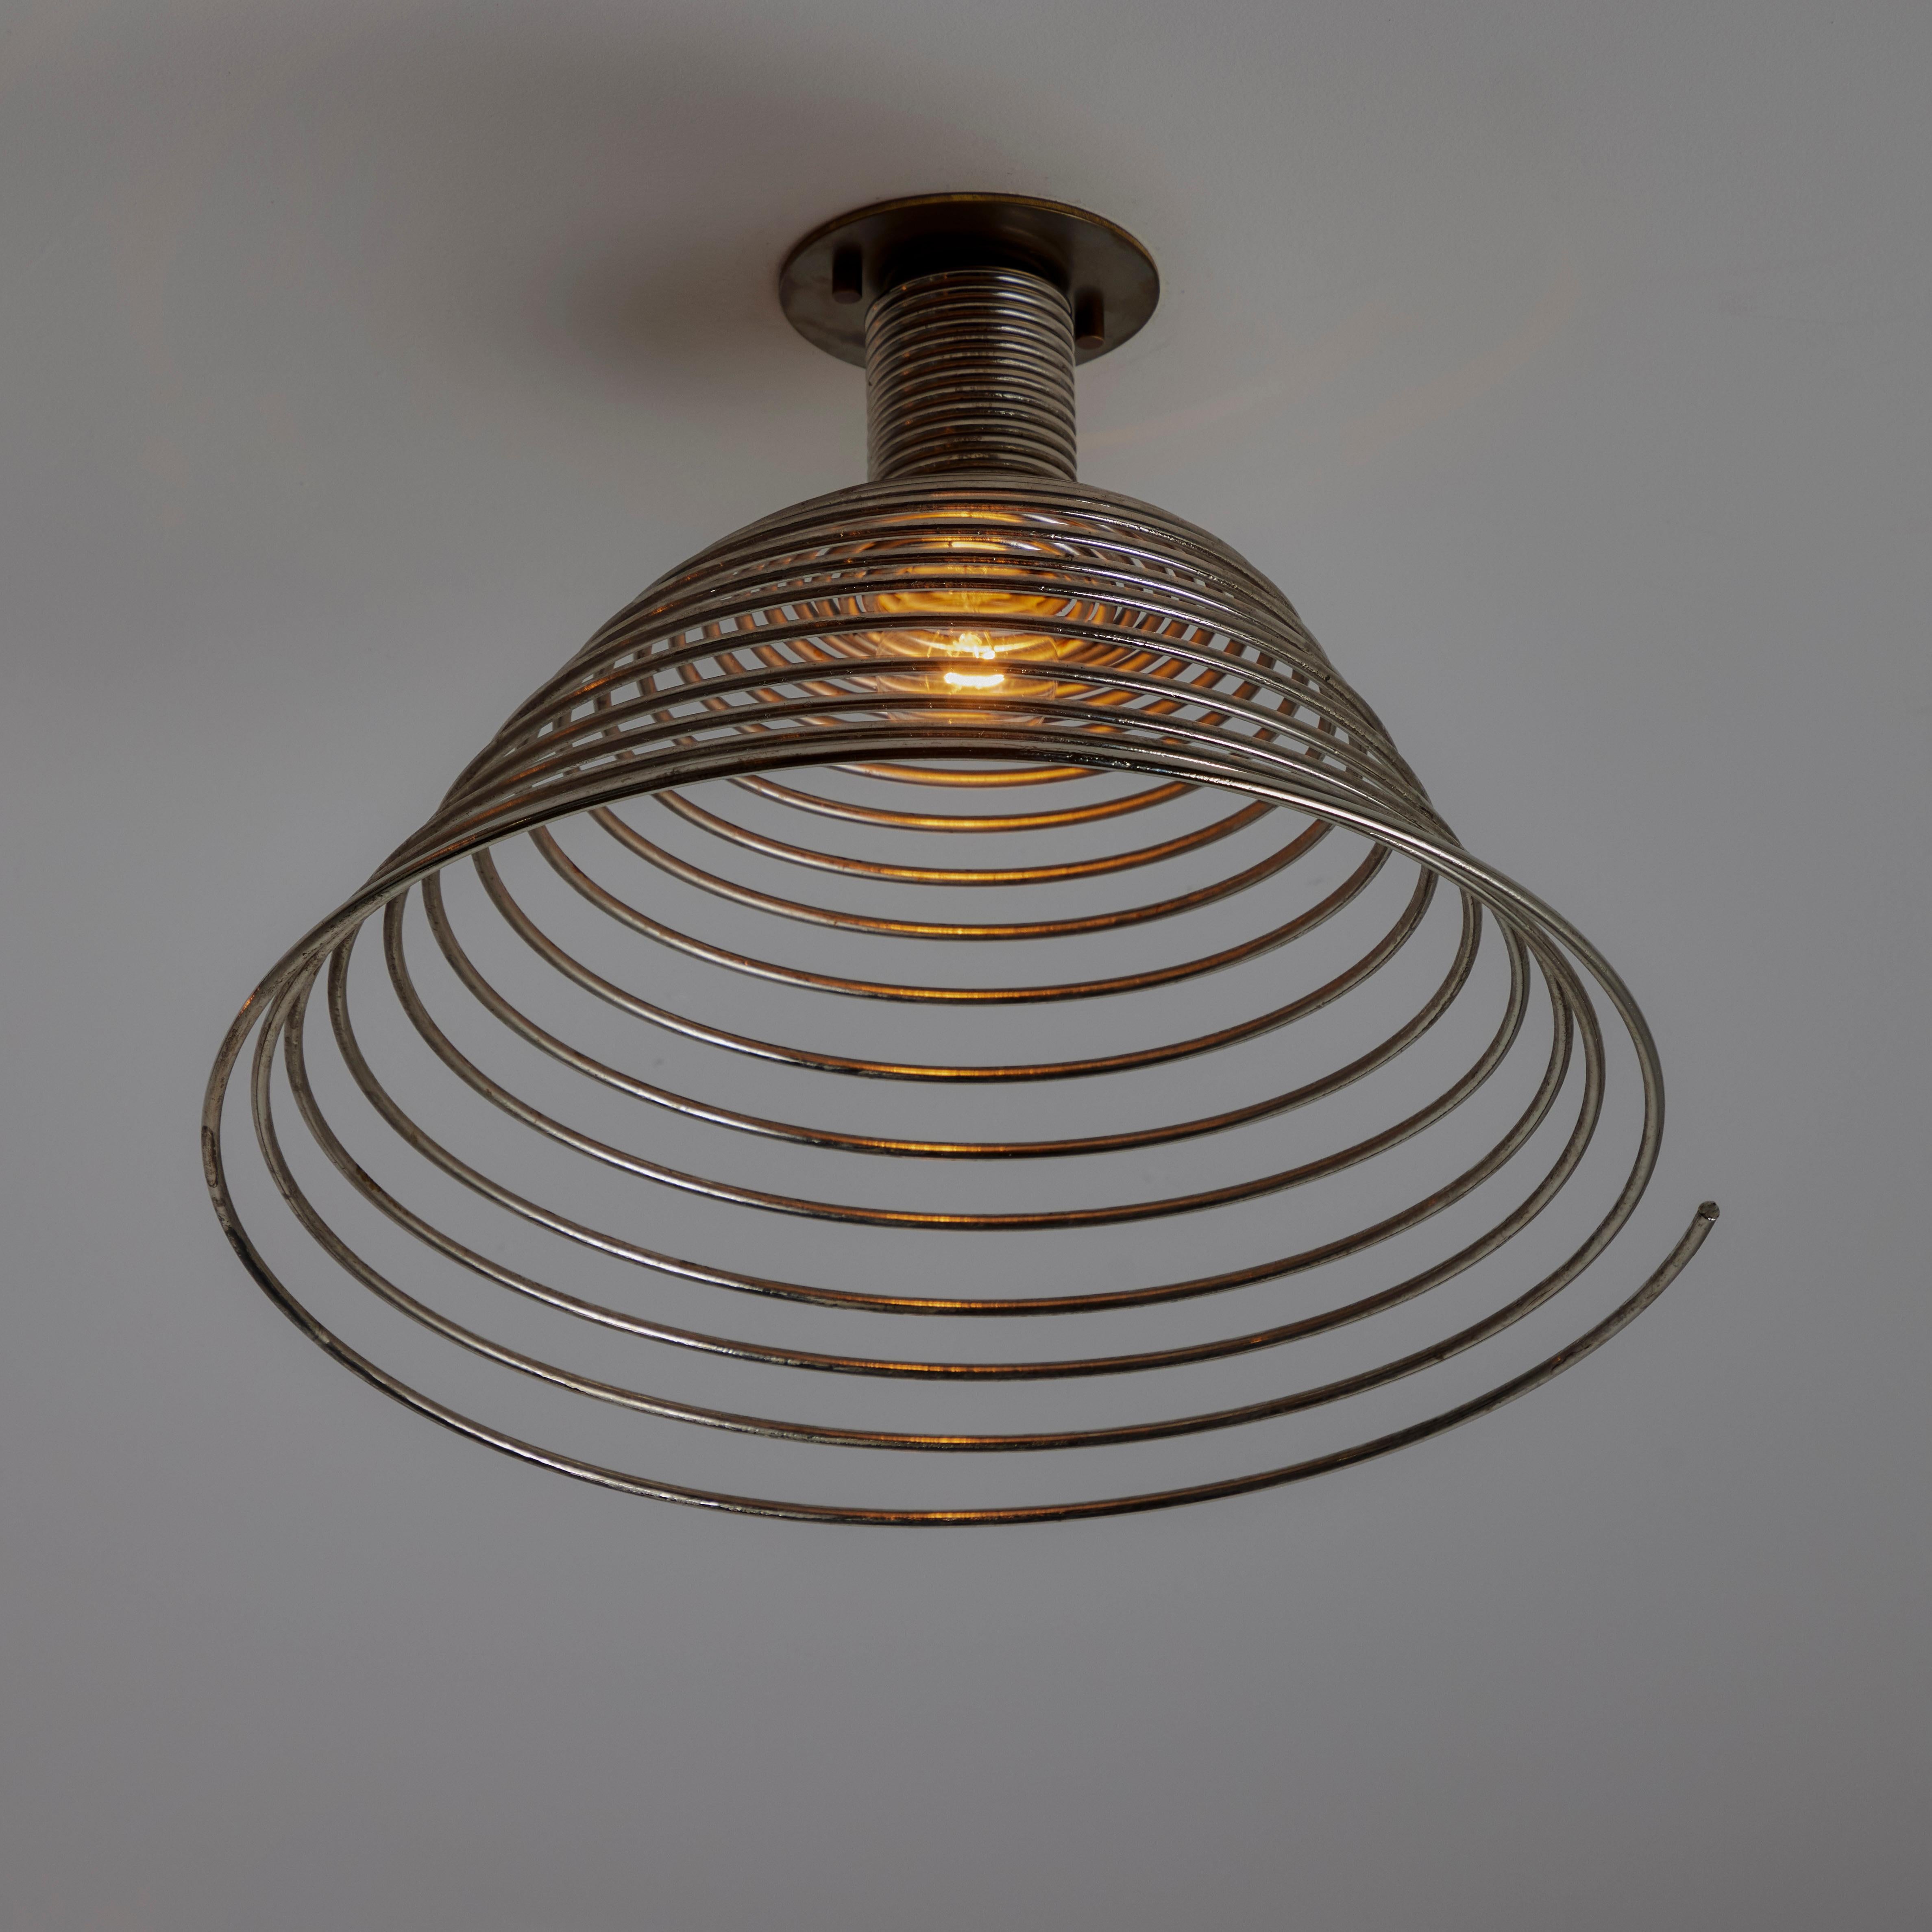 Single 'Spirali' Ceiling or Wall Light by Angelo Mangiarotti for Candle For Sale